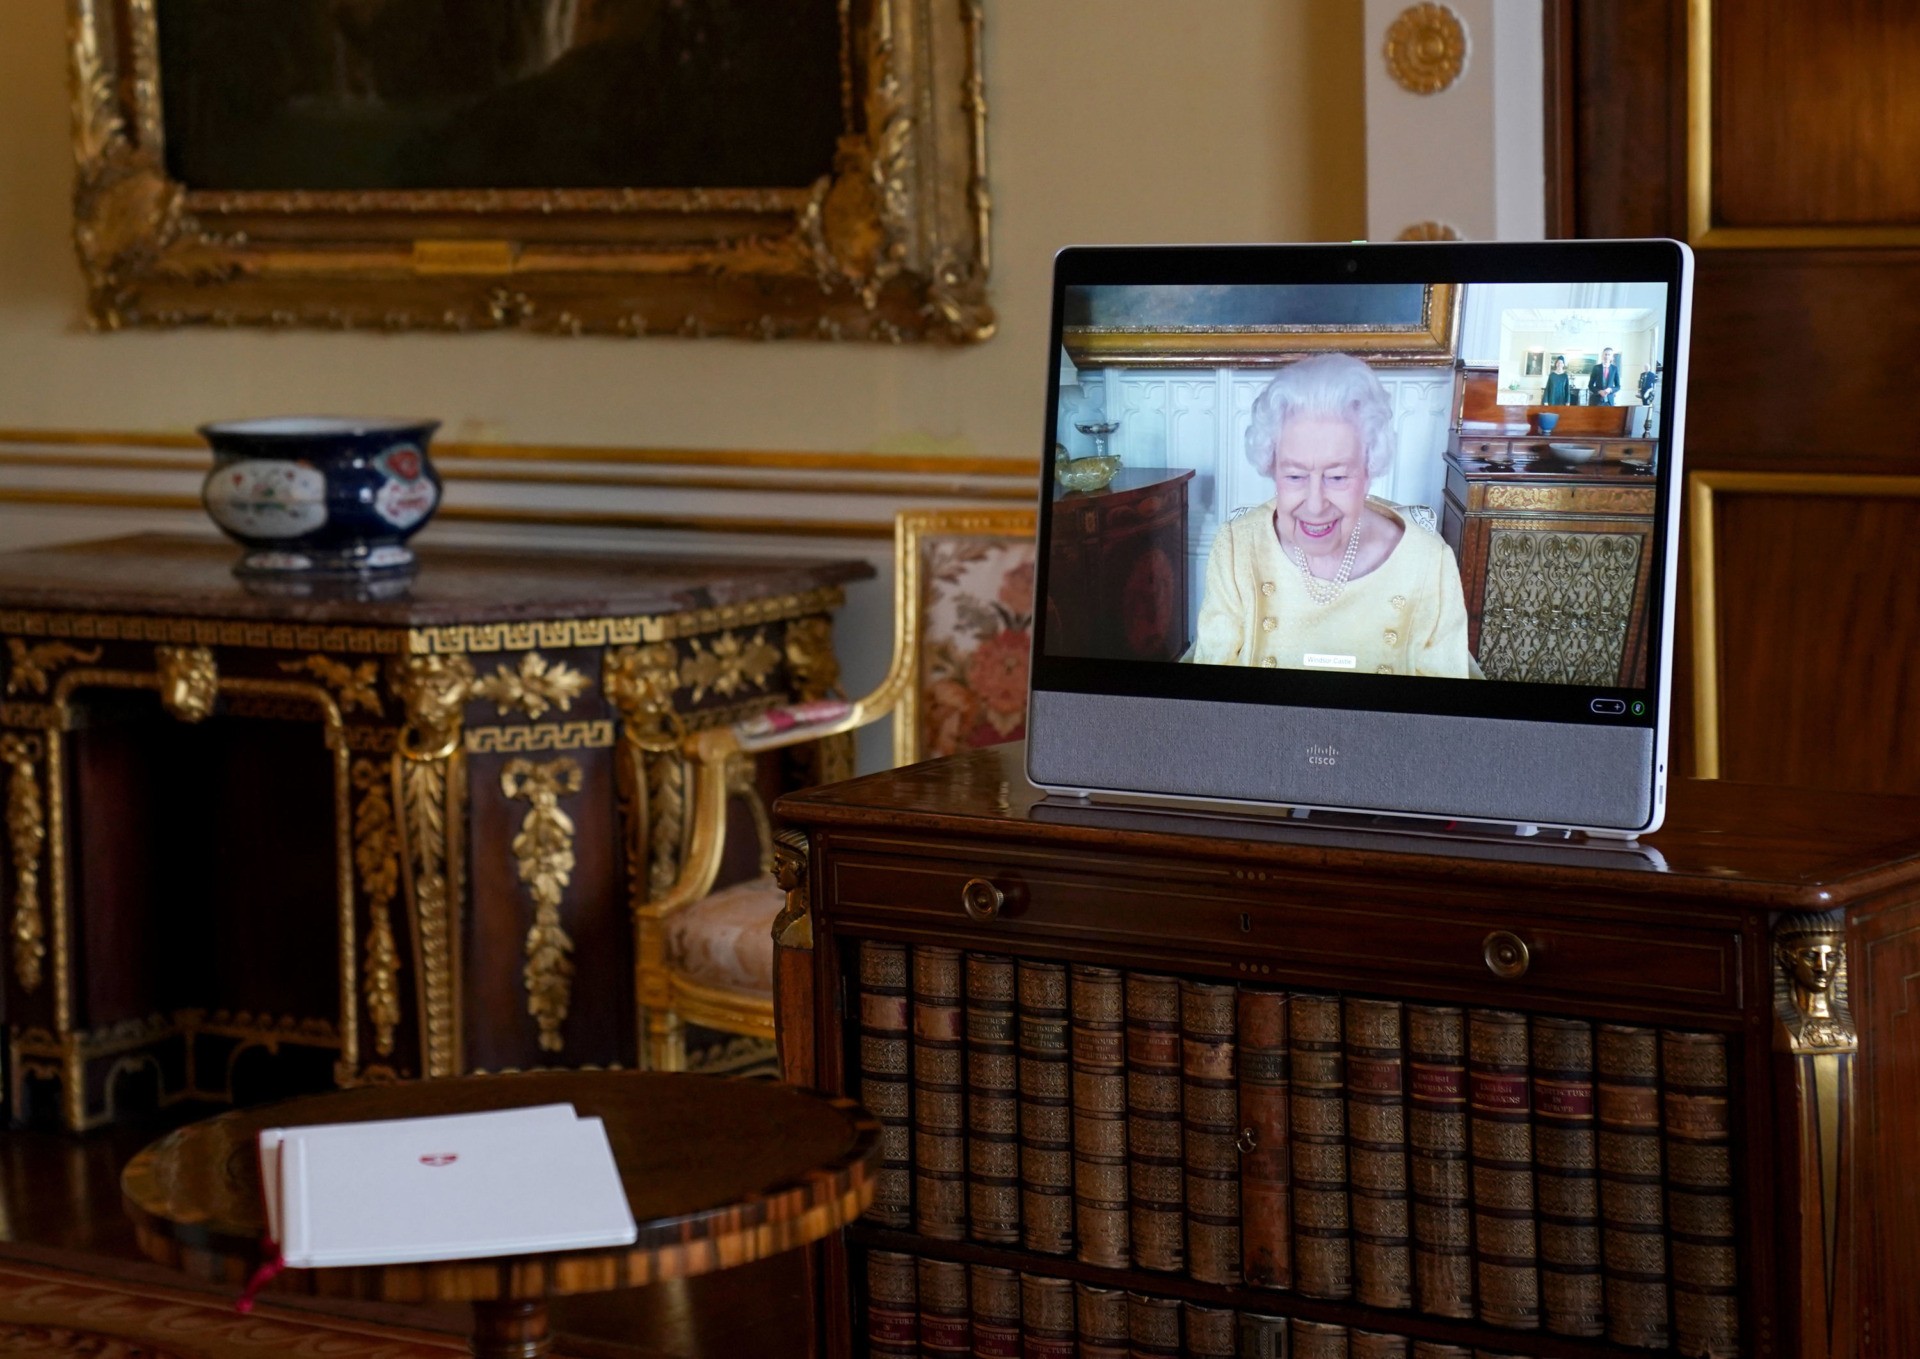 LONDON, ENGLAND - OCTOBER 26: Queen Elizabeth II appears on a screen via videolink from Windsor Castle, where she is in residence, during a virtual audience at Buckingham Palace, on October 26, 2021 in London, England. (Photo Victoria Jones - Pool/Getty Images)